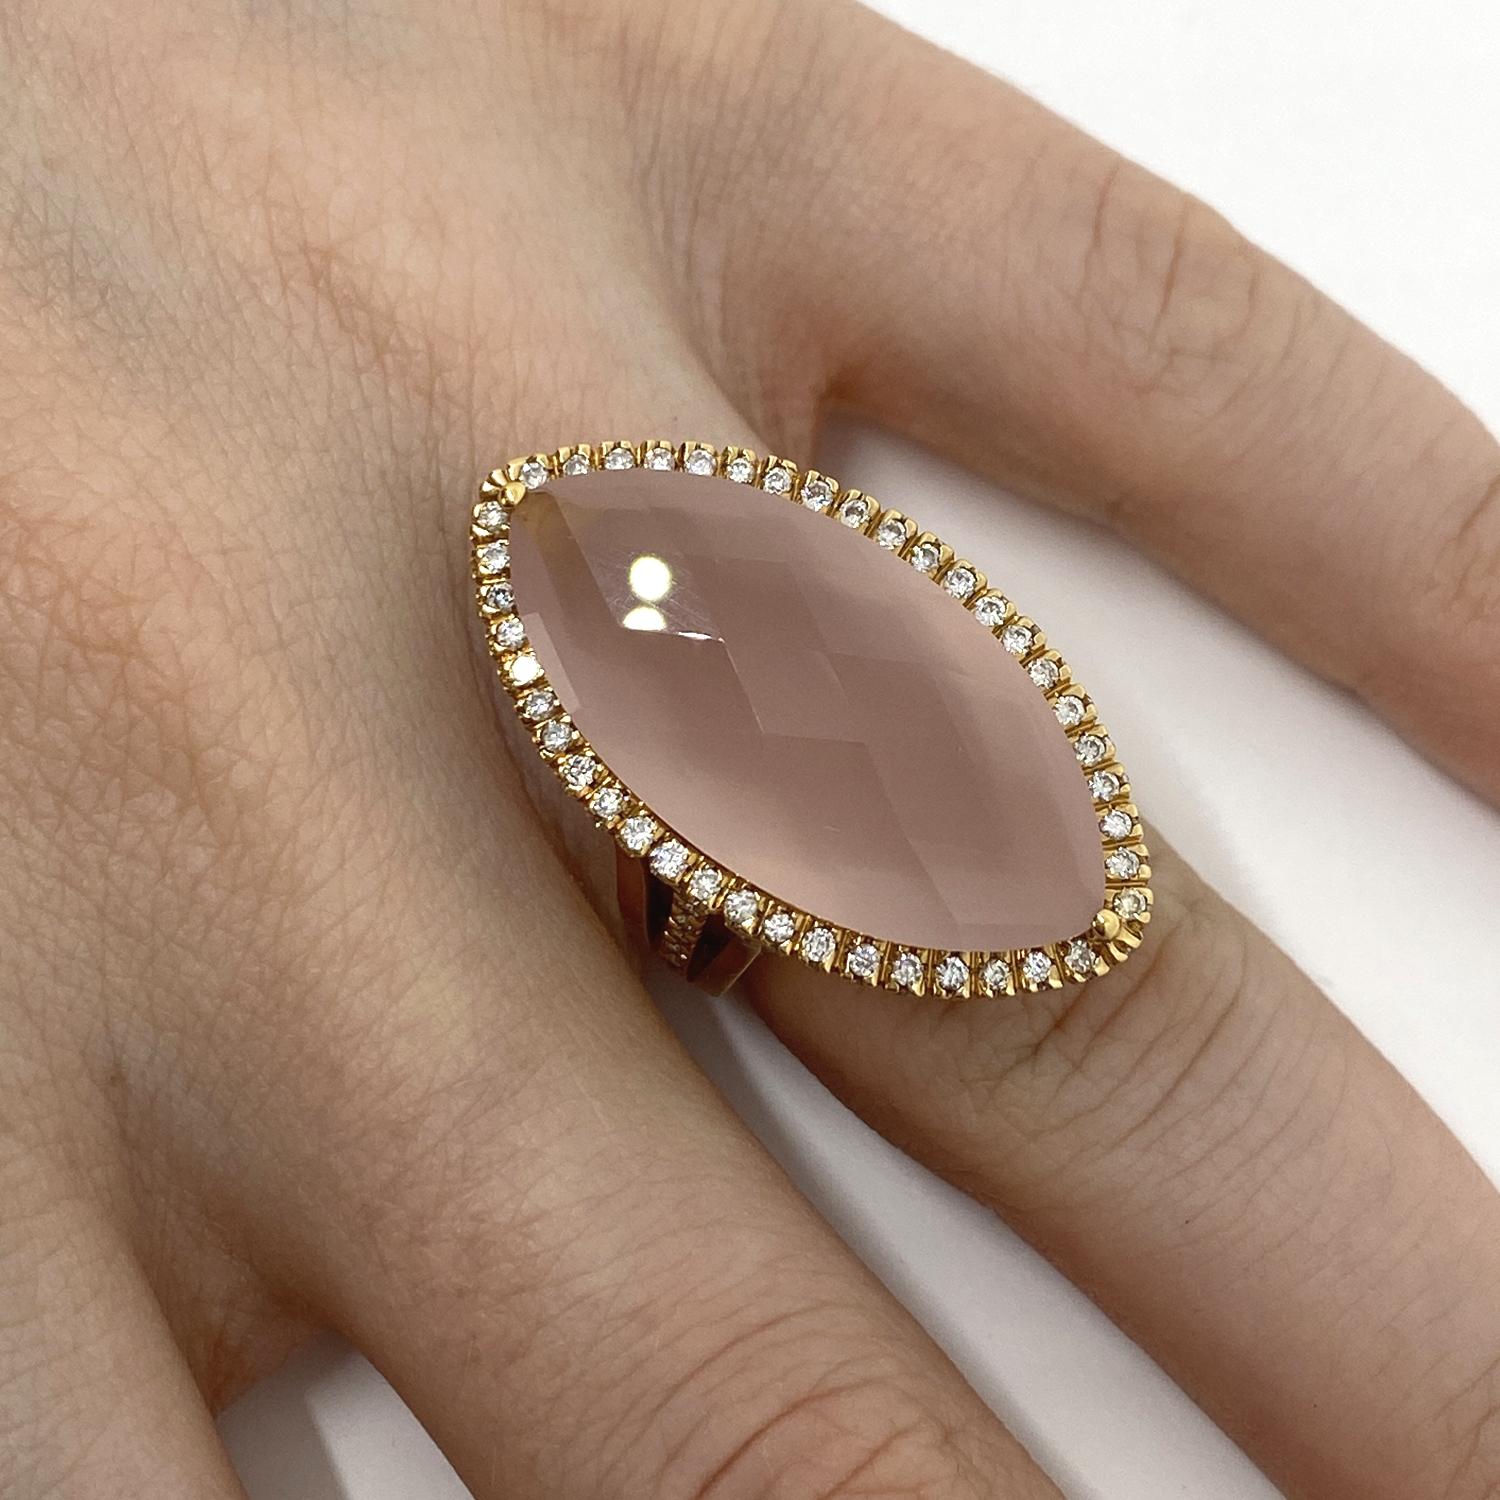 Ring made of 18 kt yellow gold with central Pink Navette made of natural citrine quartz and outline of natural white brilliant-cut diamonds for ct.0.75

Welcome to our jewelry collection, where every piece tells a story of timeless elegance and